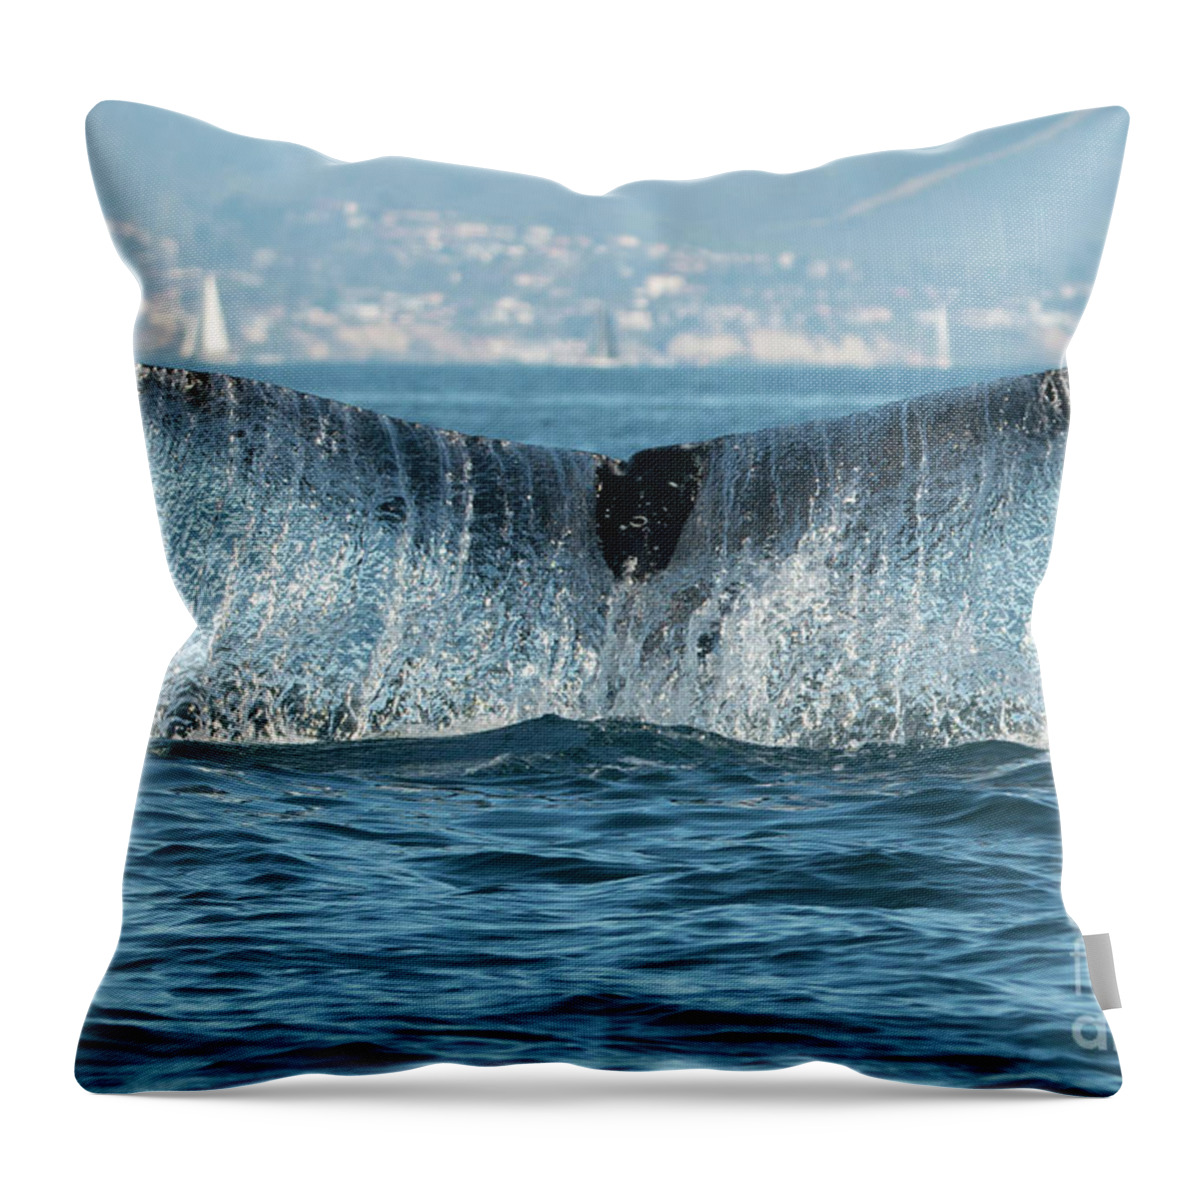 Flukes Throw Pillow featuring the photograph Humpback Waterfall Fluke by Loriannah Hespe